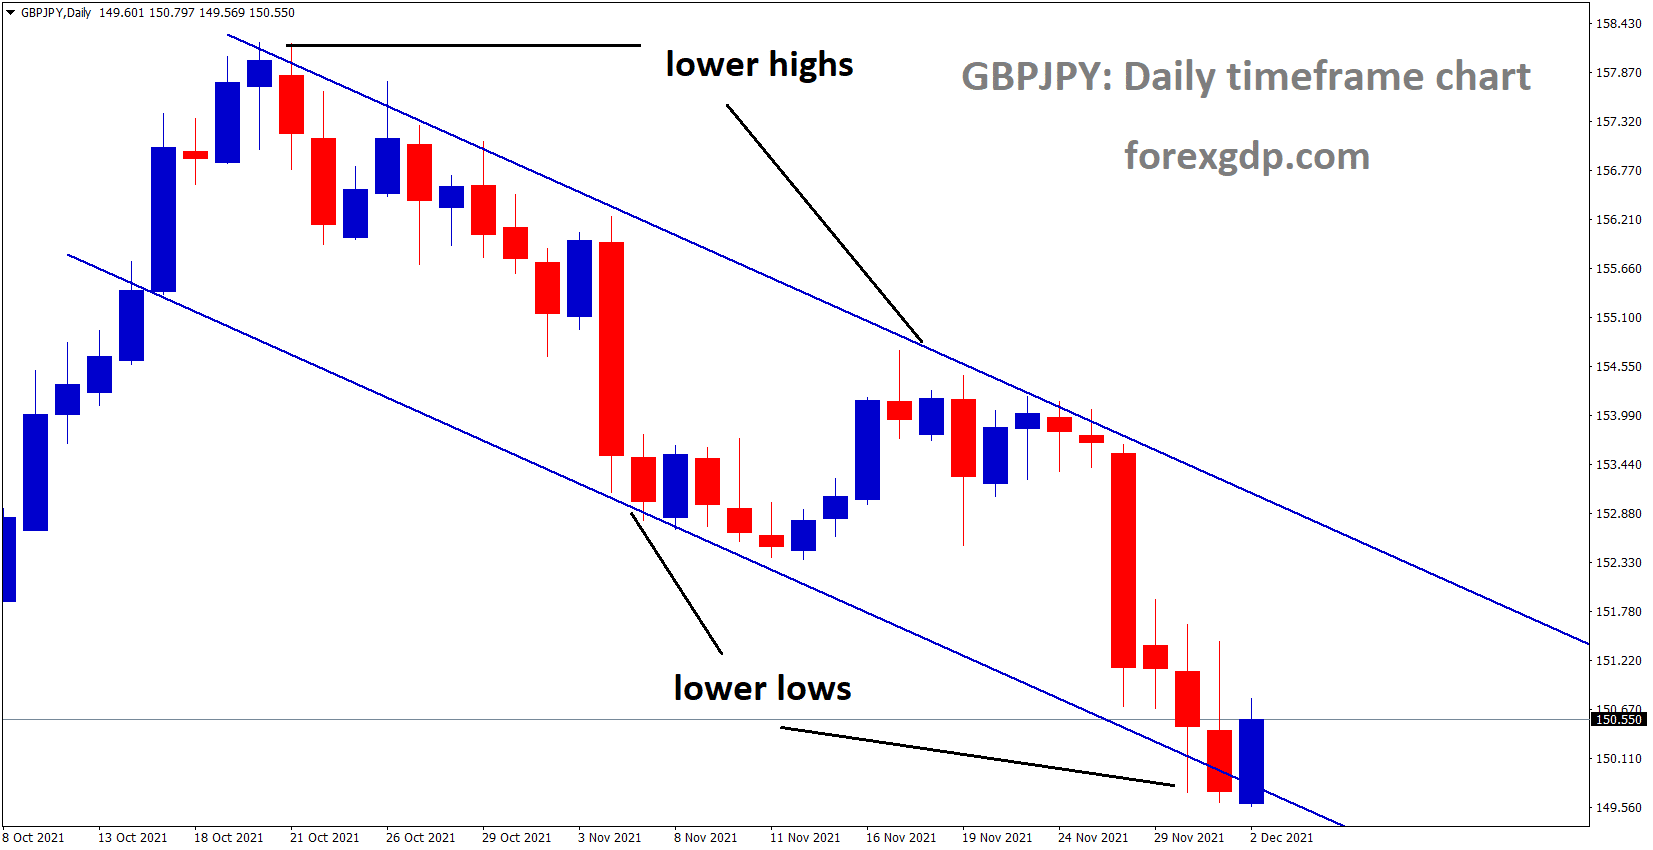 GBPJPY is moving in the Descending channel and the market is rebounding from the lower low area of the channel